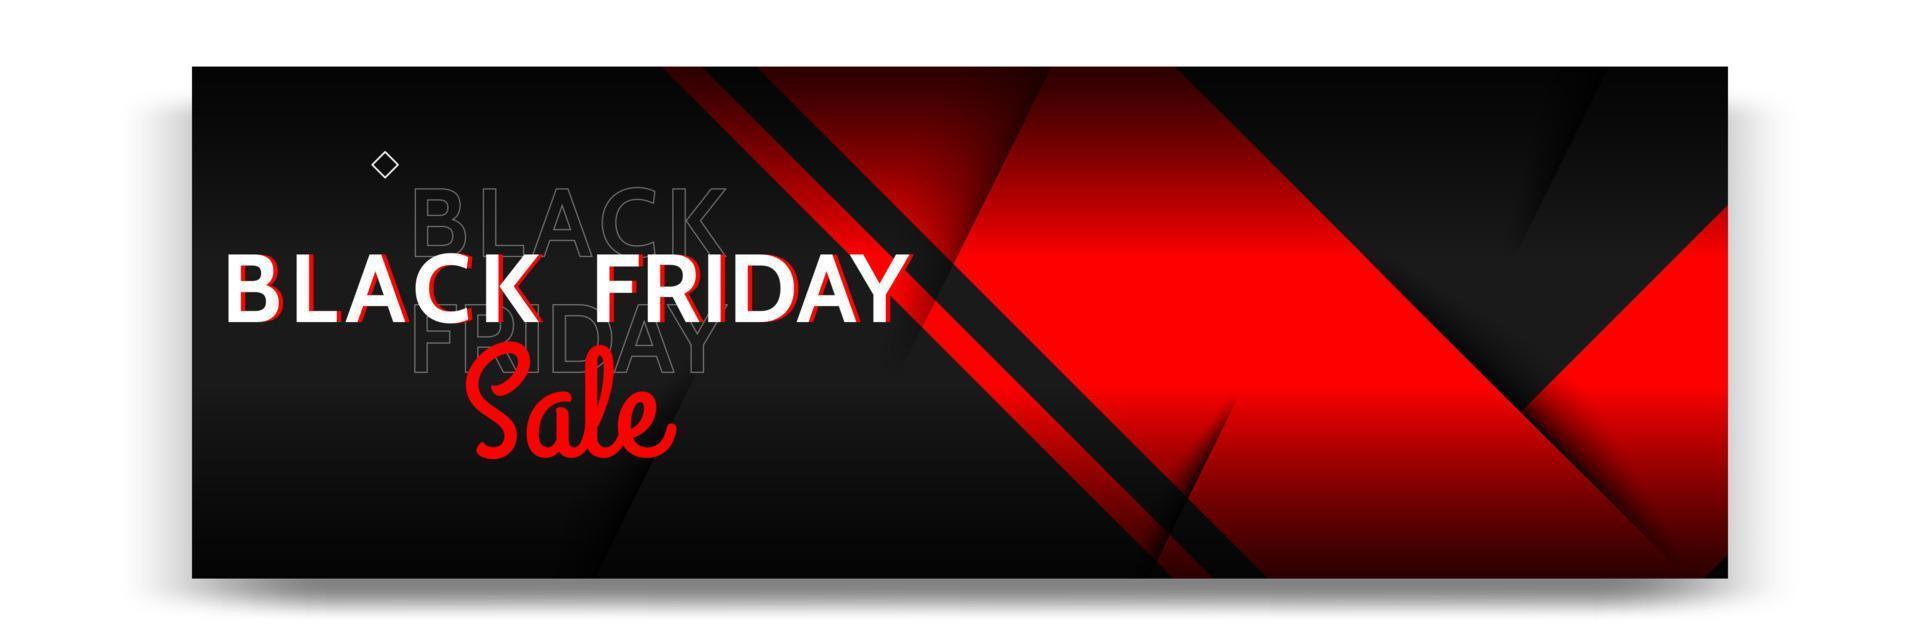 Minimal modern geometric horizontal Black Friday sale banner in black, white and red color. vector